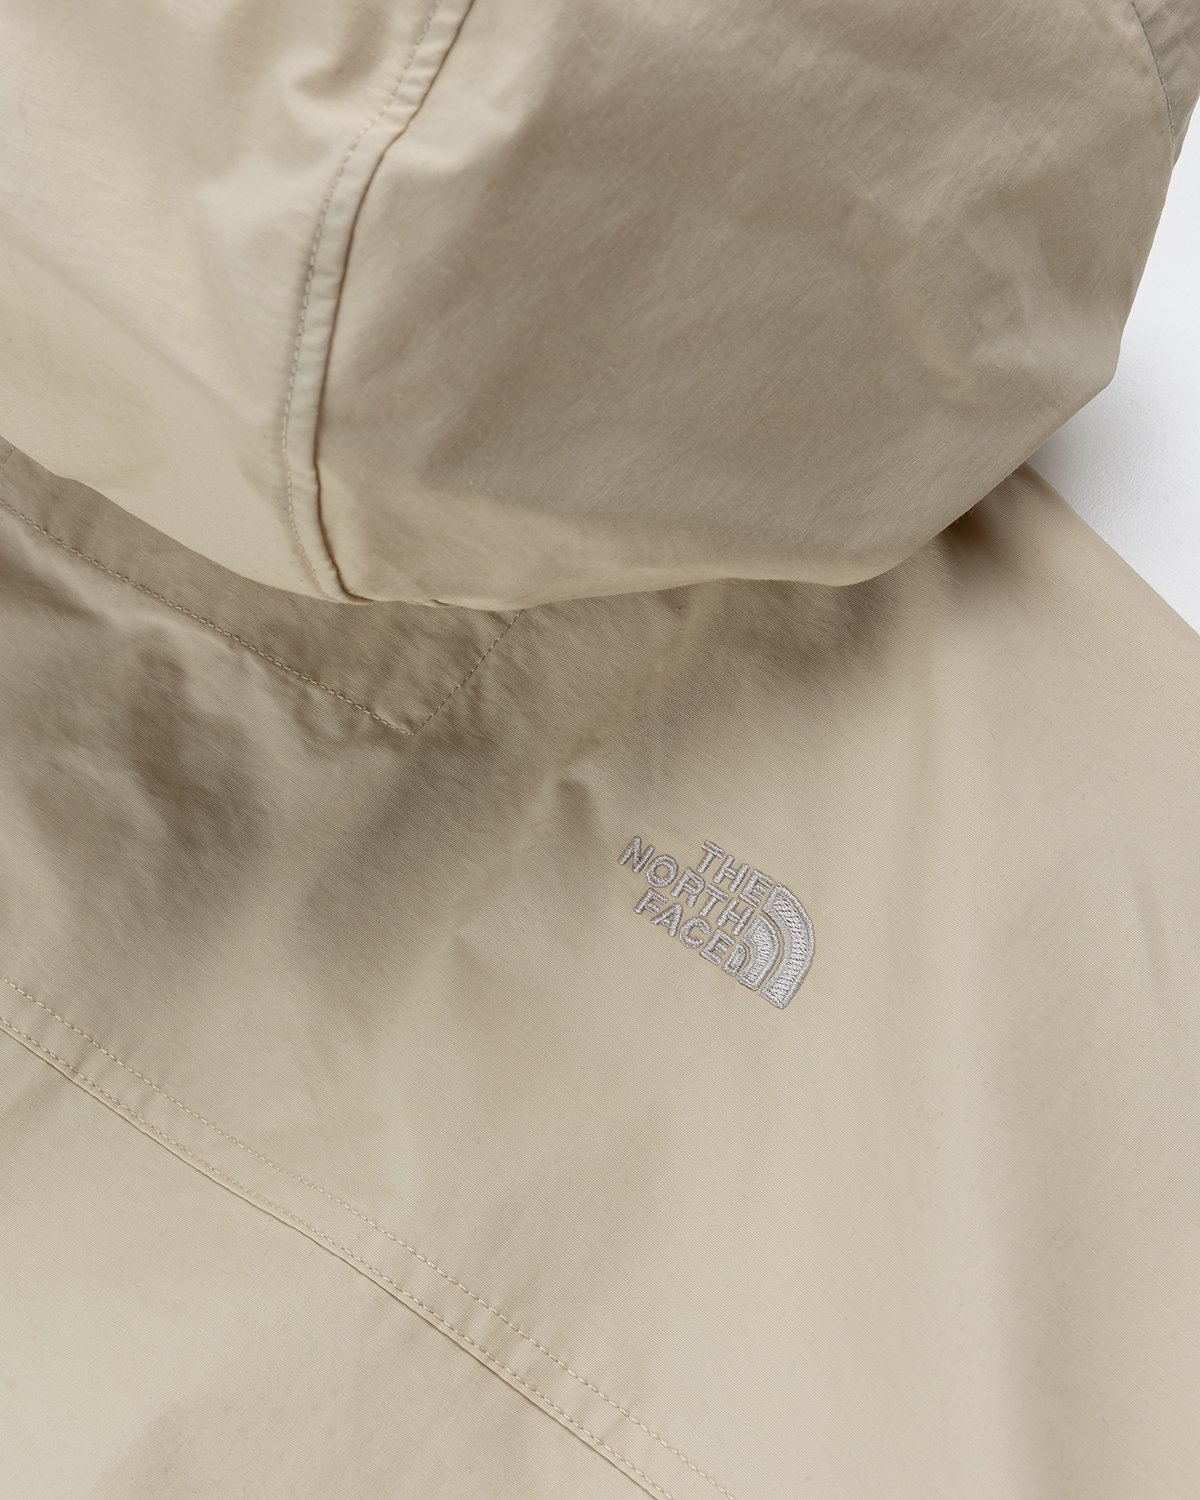 The North Face - Sky Valley Windbreaker Jacket Gravel - Clothing - Beige - Image 3